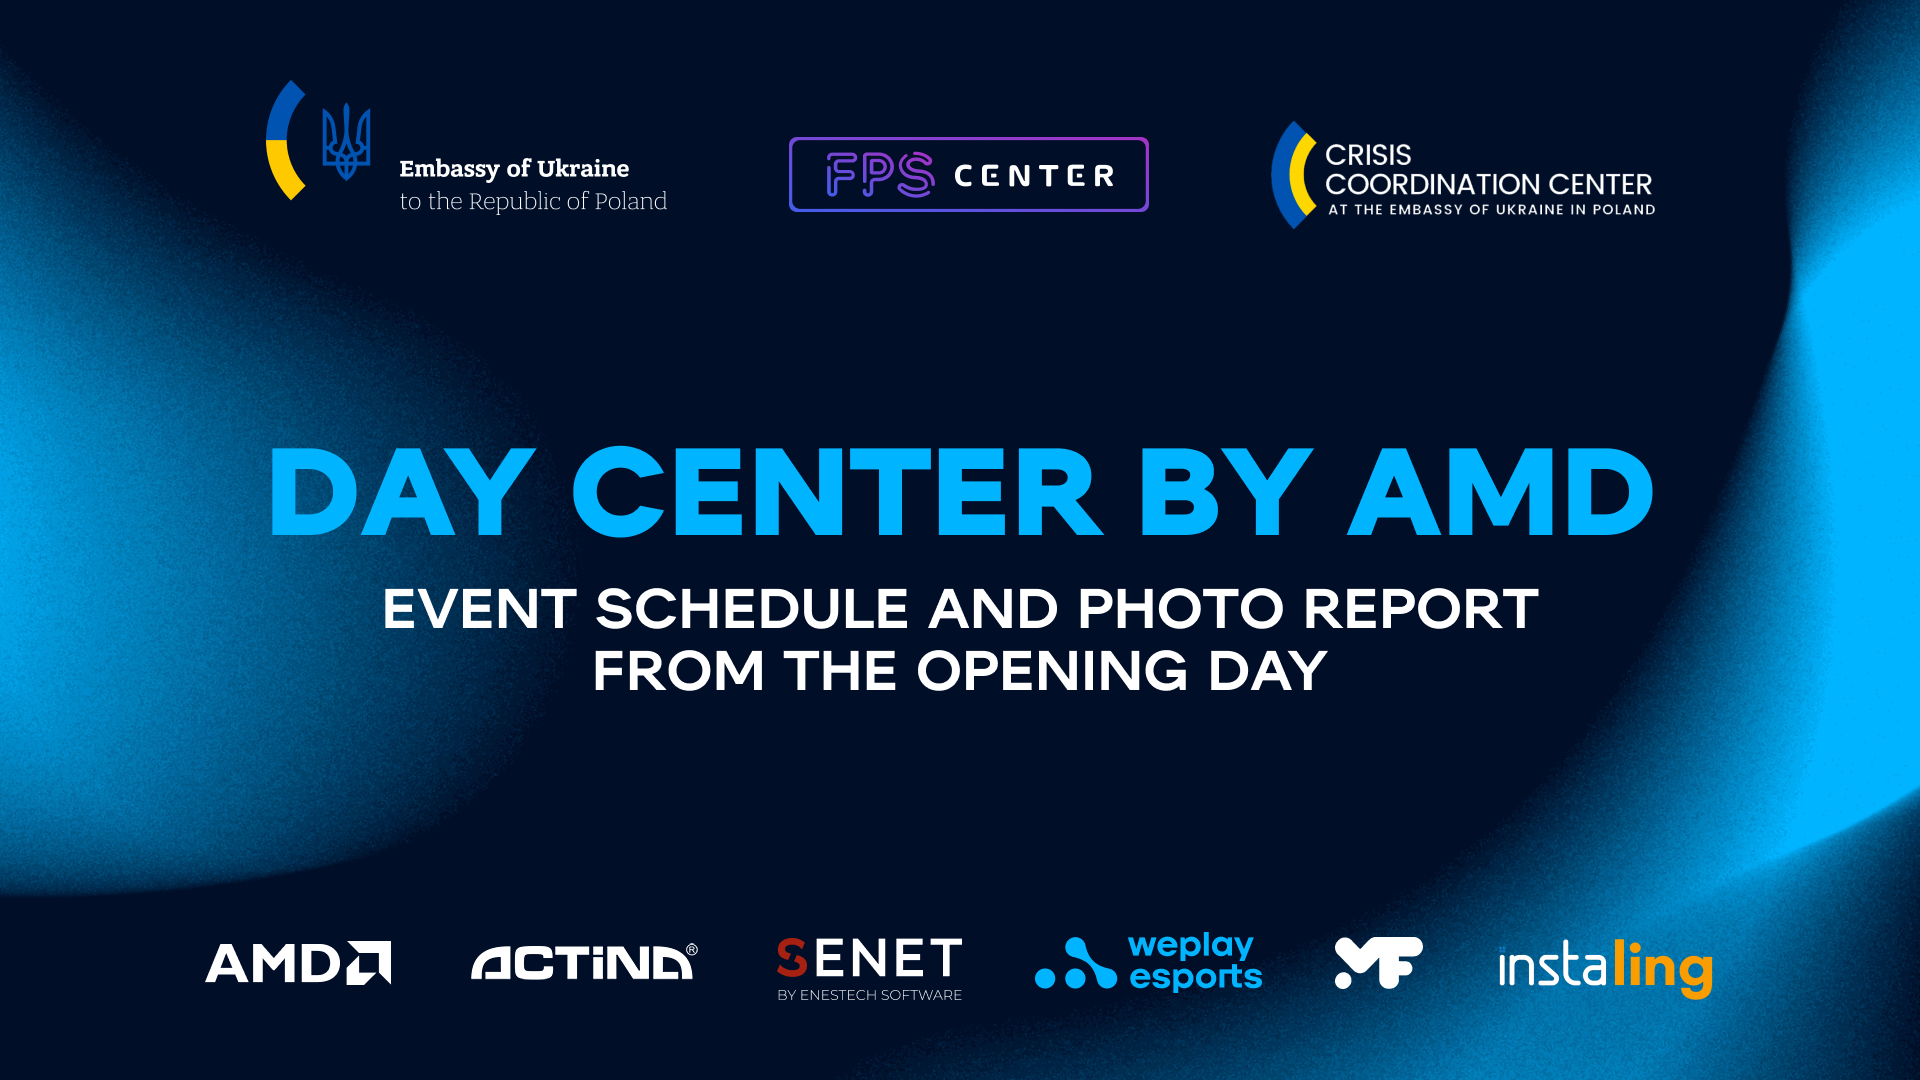 Day Center by AMD: event schedule and photo report from the opening day. Image: WePlay Holding